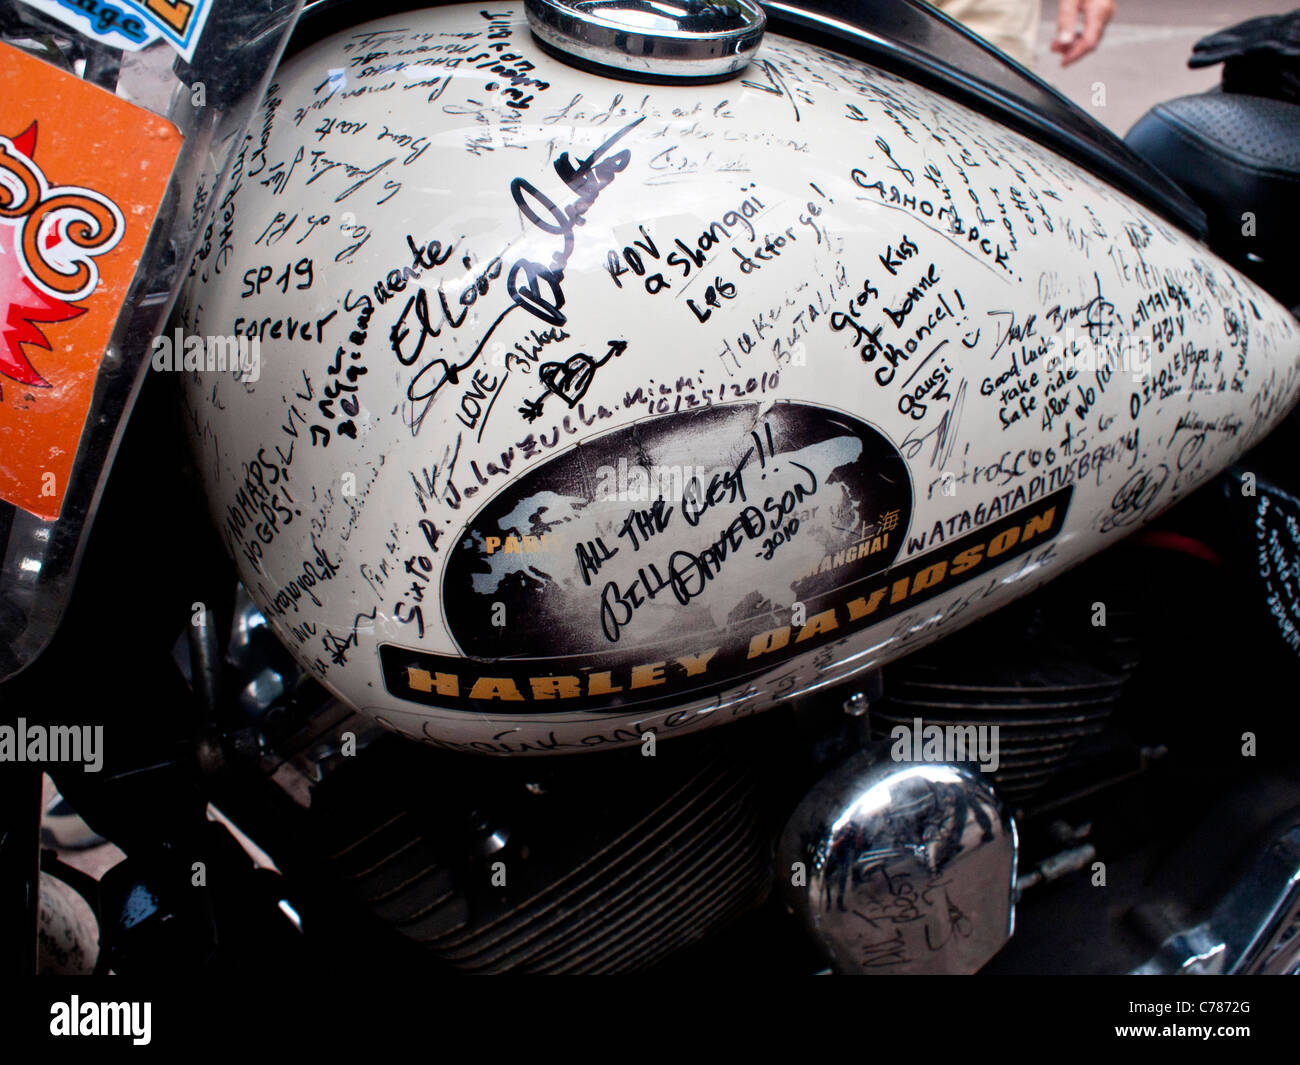 Motorcycle with graffiti on the tank and fender Stock Photo